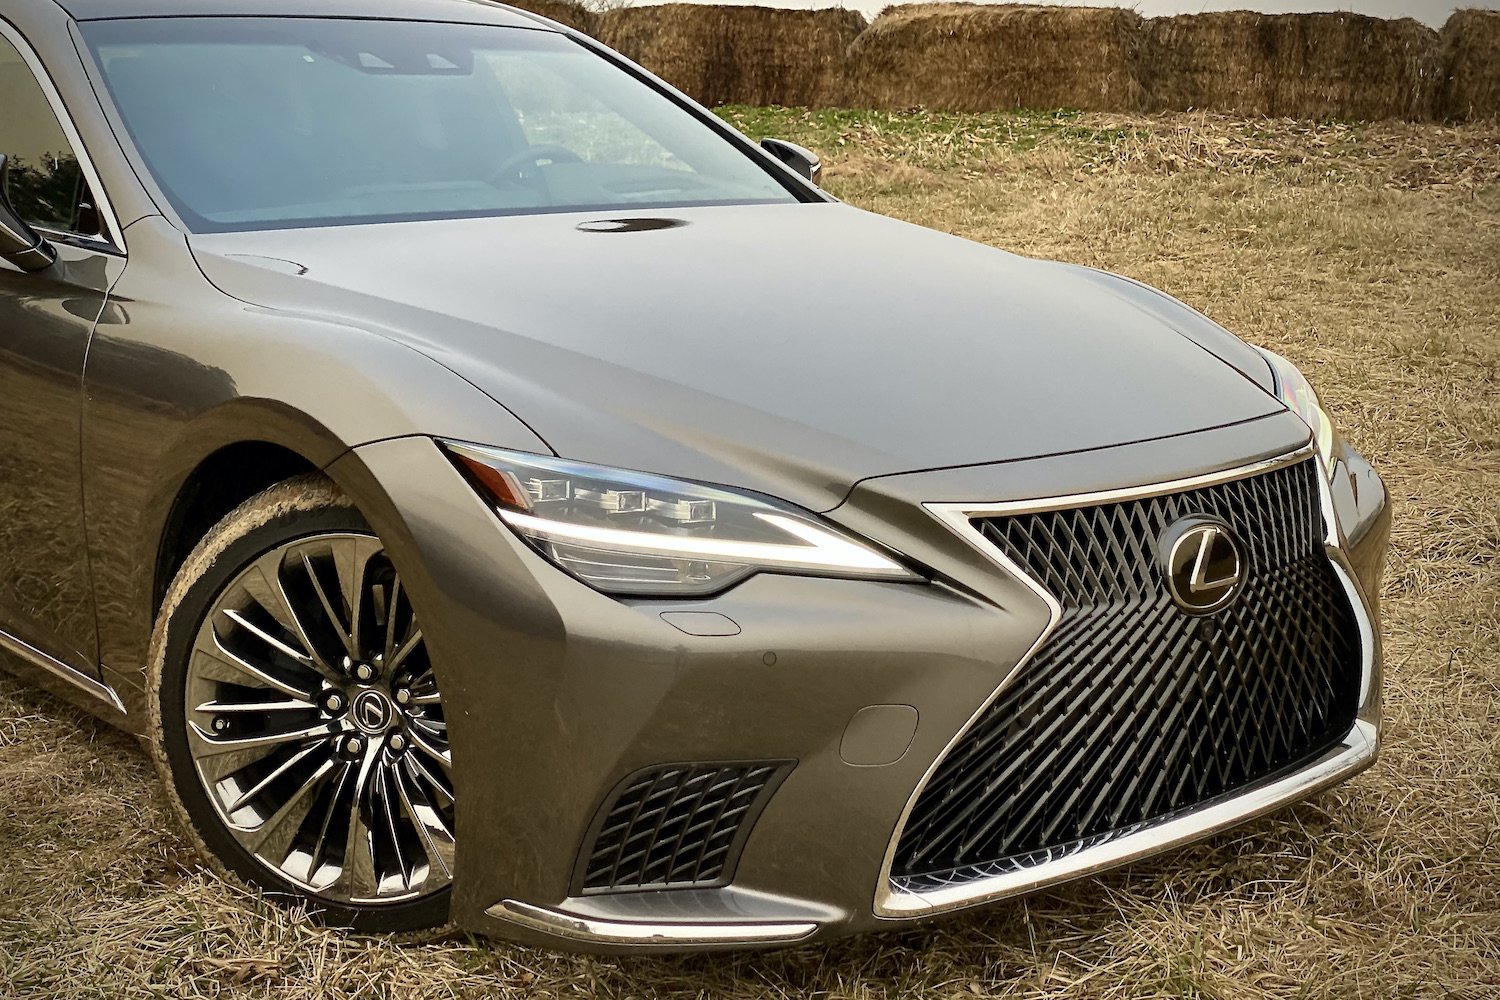 A close-up of the 2021 Lexus LS500's front end on a grassy field.